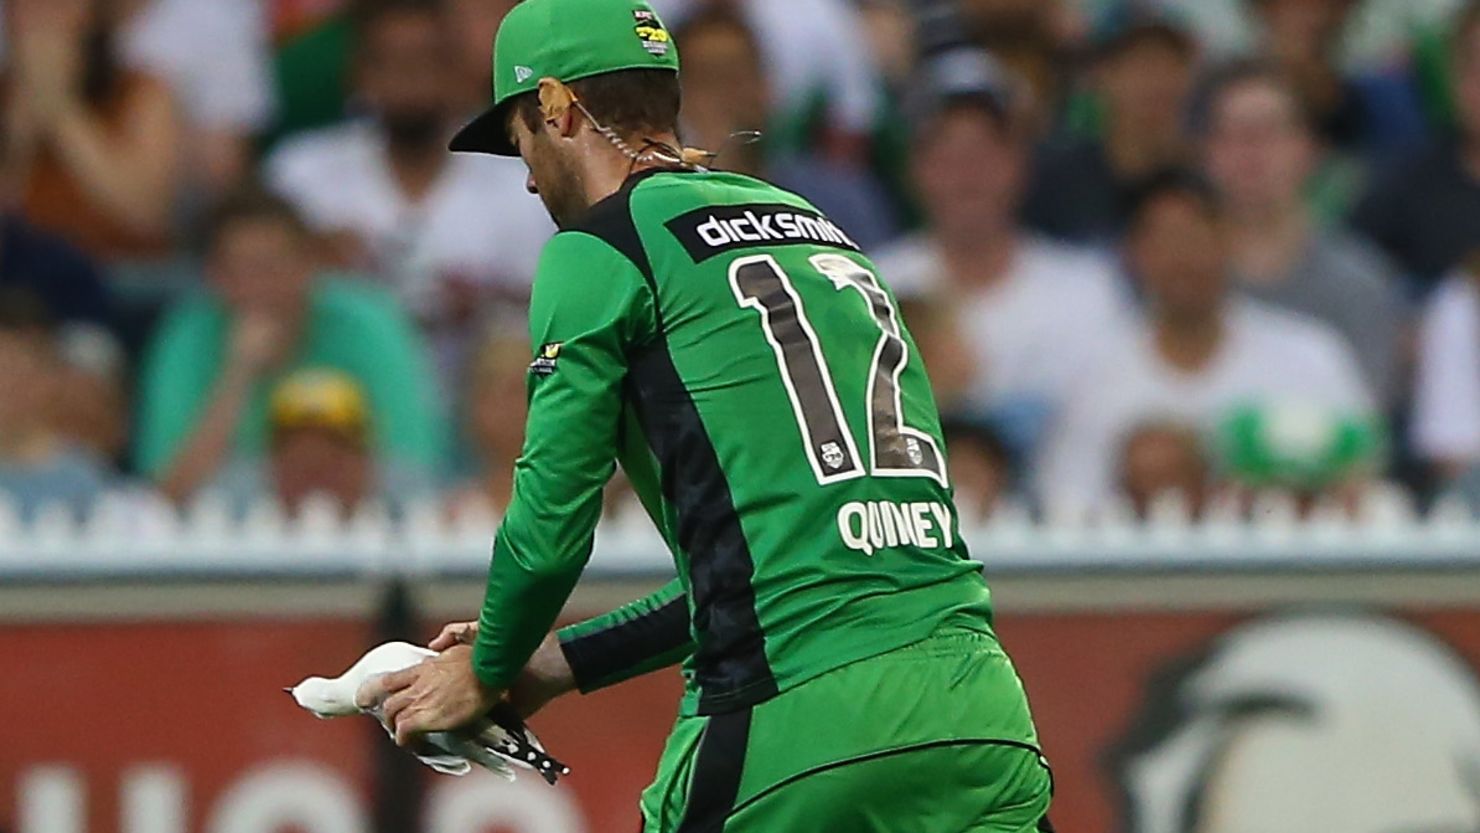 Rob Quiney of the Melbourne Stars removes the seagull from the pitch after it was struck by a cricket ball.